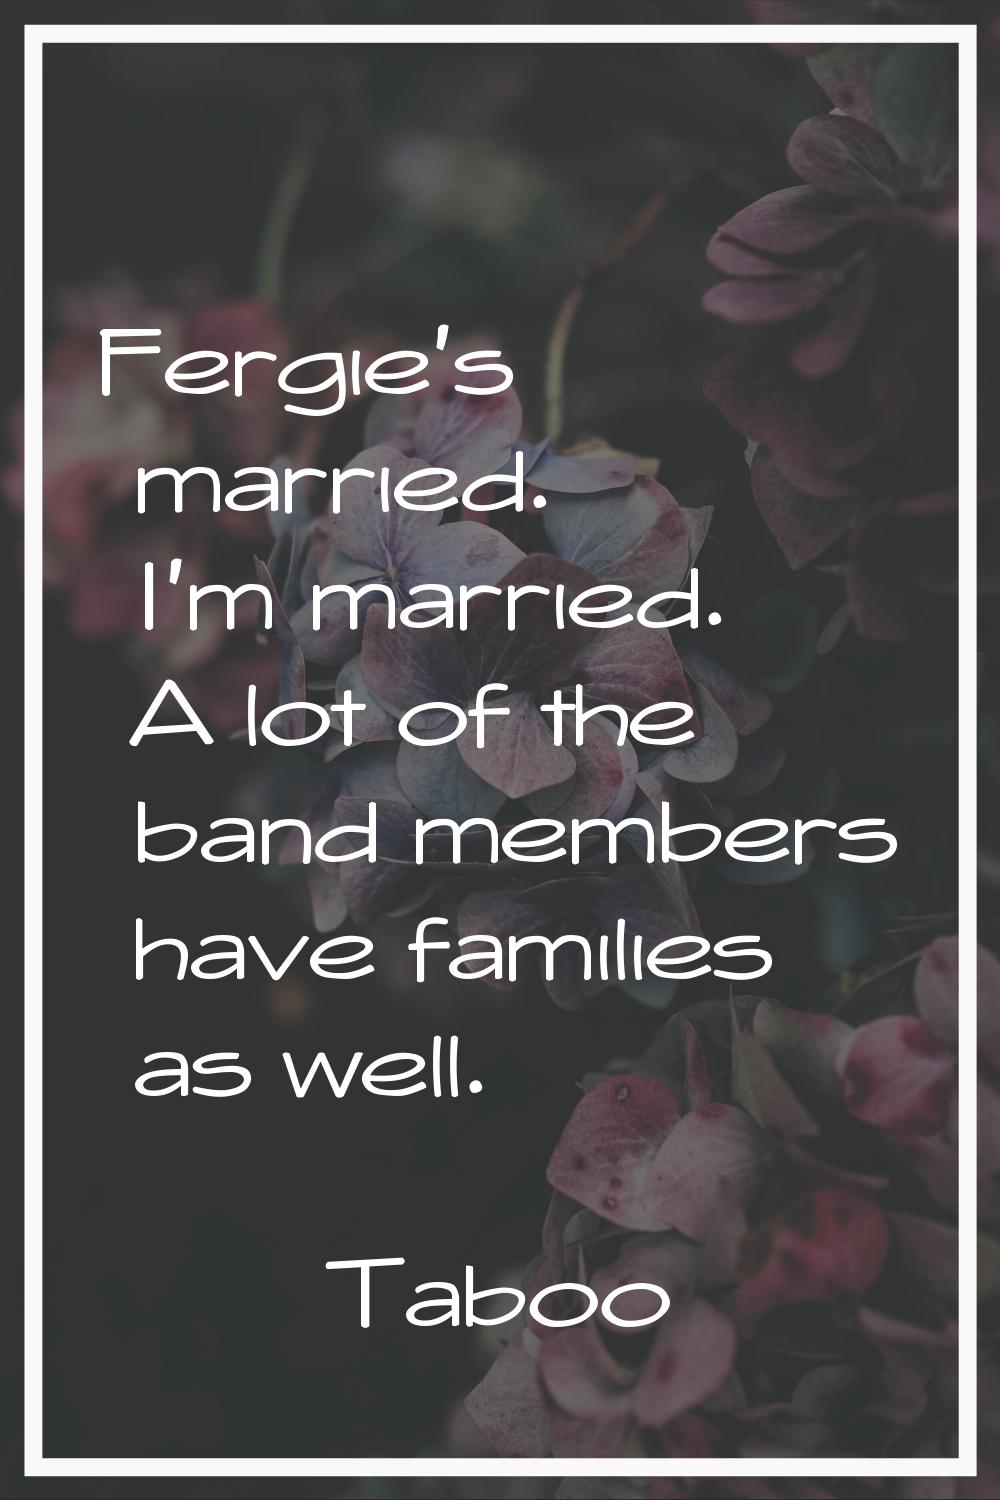 Fergie's married. I'm married. A lot of the band members have families as well.